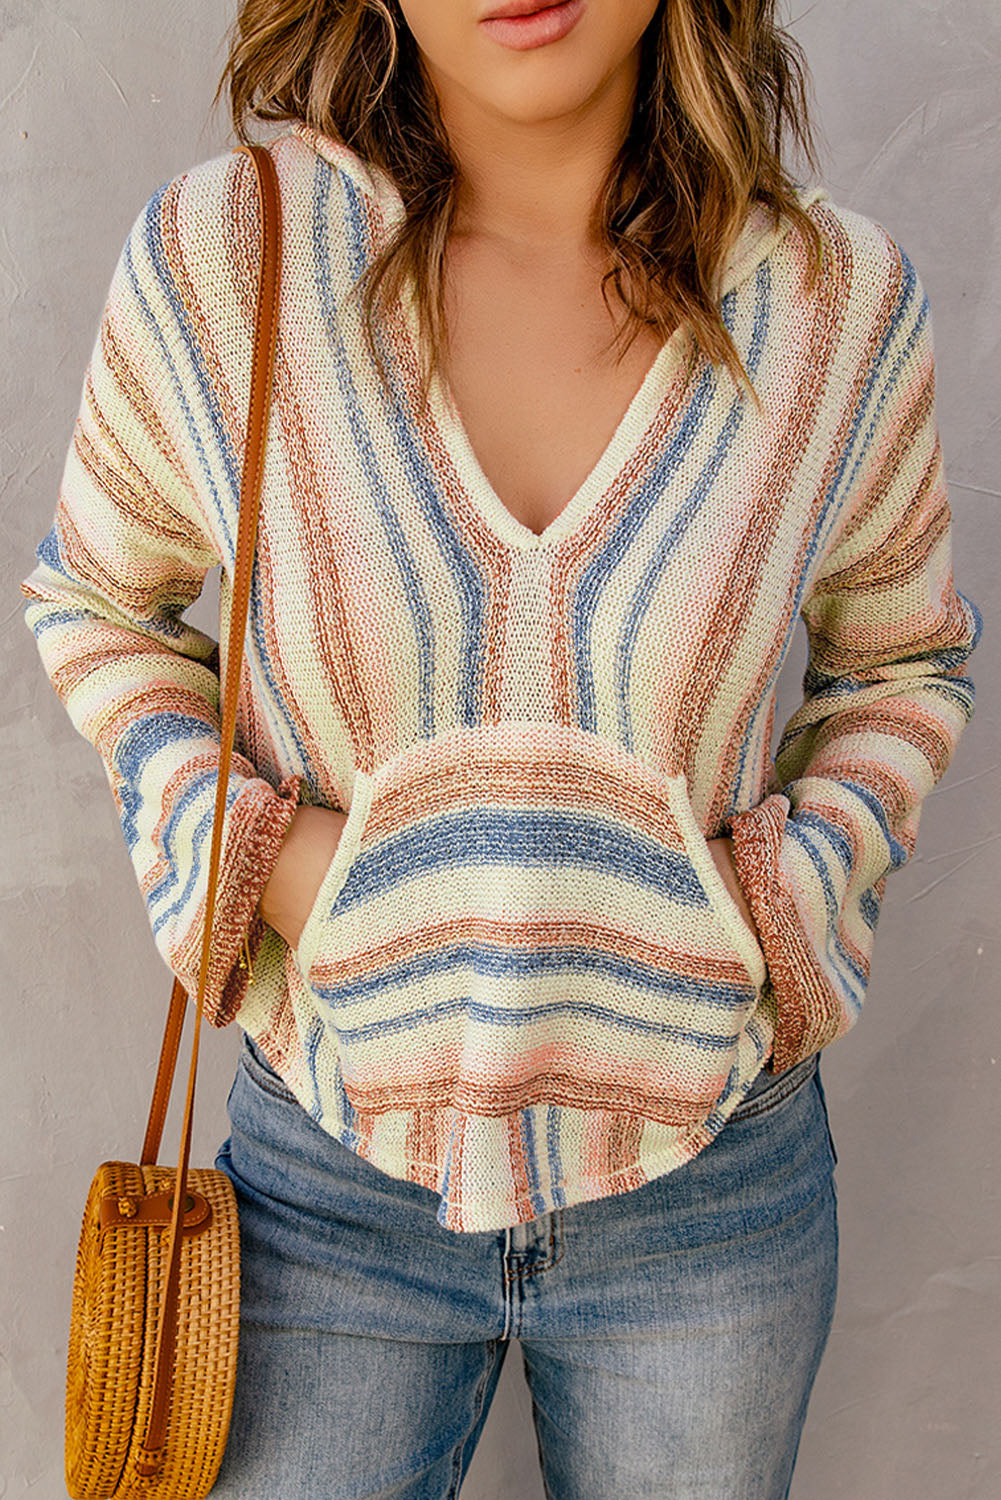 Striped Hooded Sweater with Kangaroo Pocket Print on any thing USA/STOD clothes